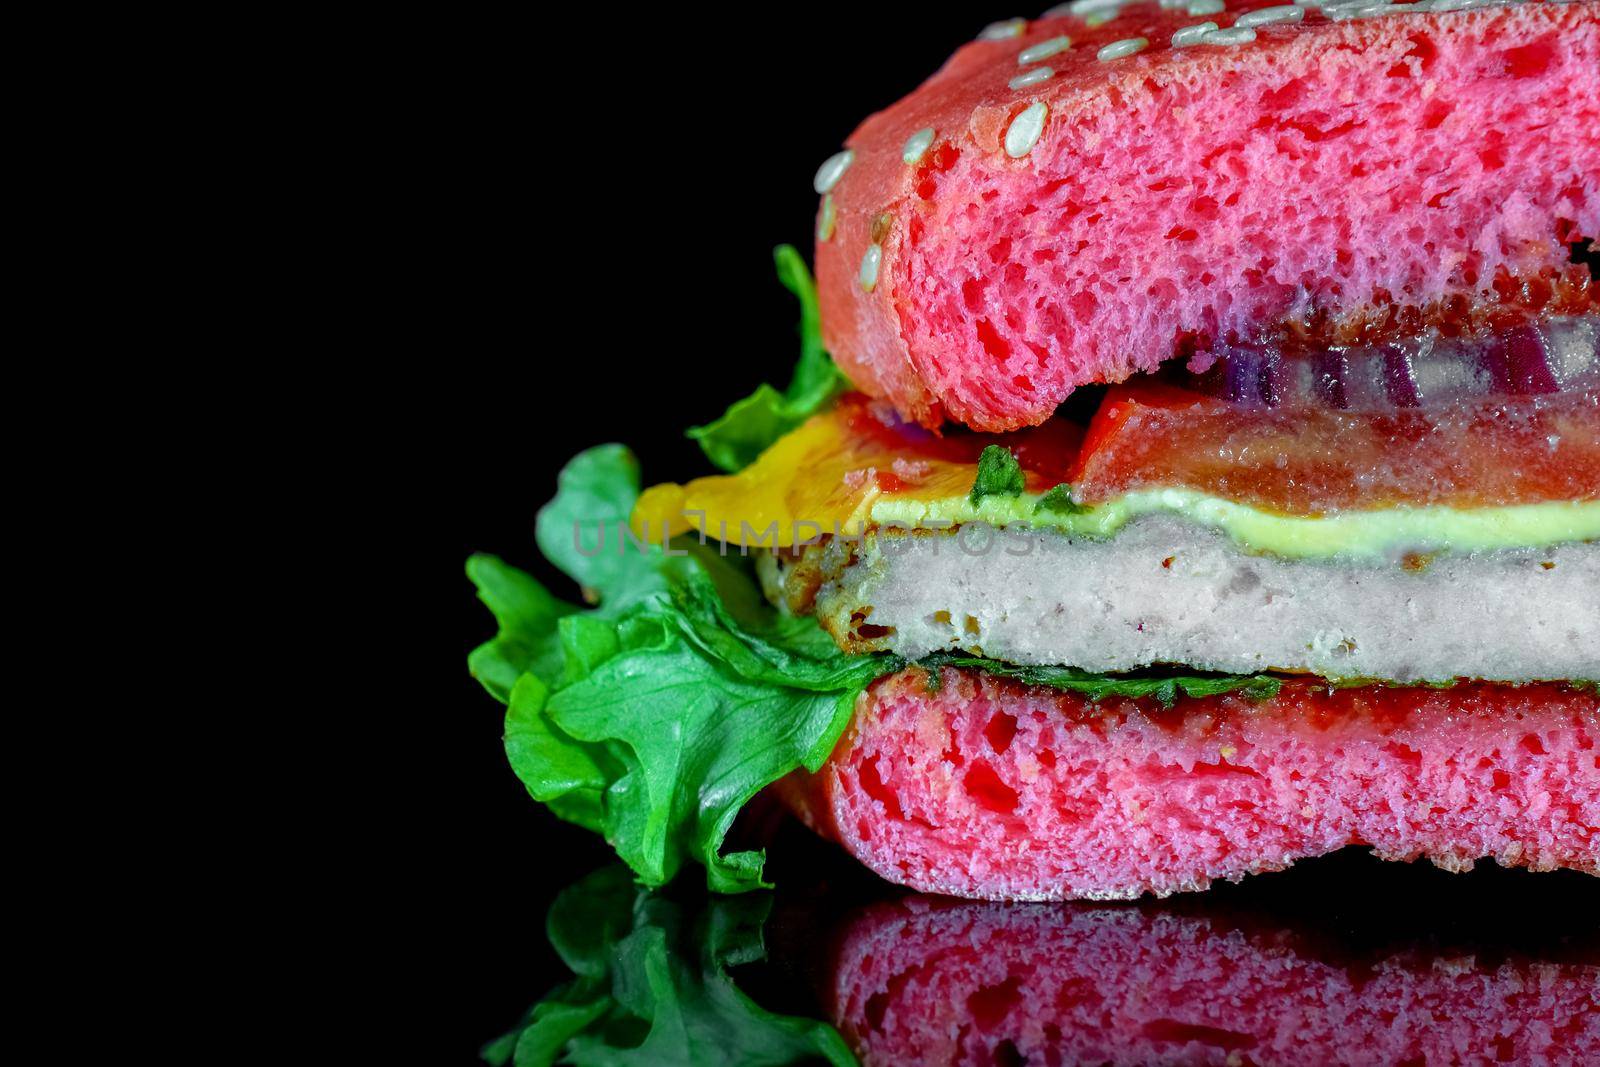 red hamburger on a black background by roman112007